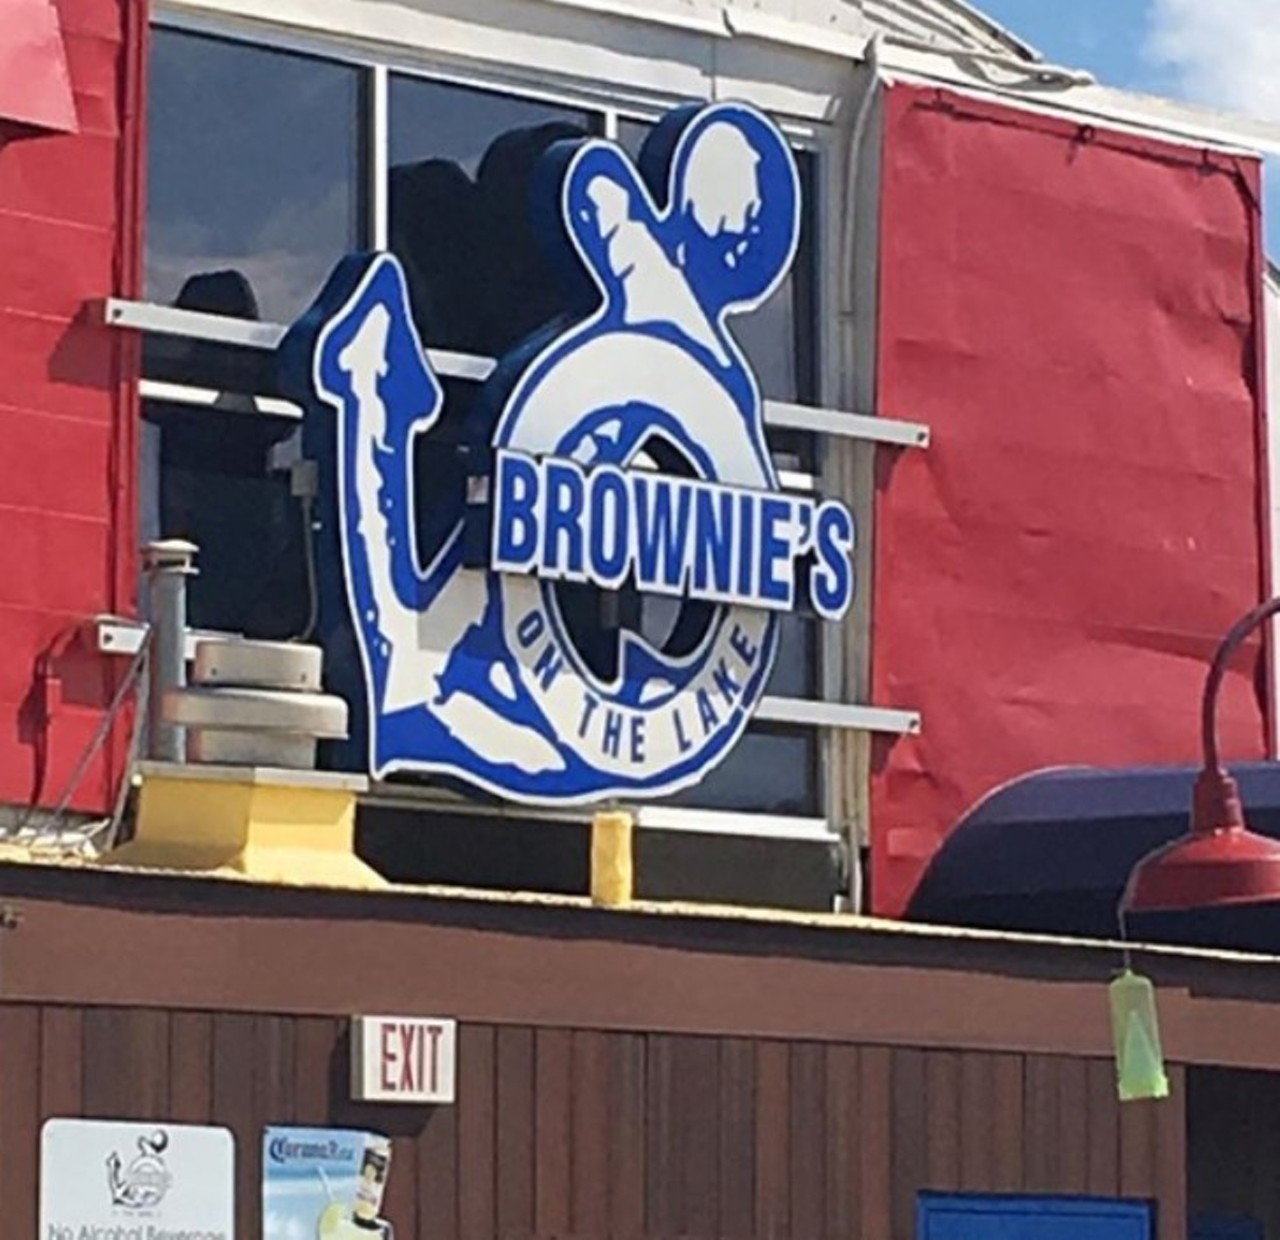 Brownies on the Lake
24214 Jefferson Ave., St. Clair Shores  
Check out the live entertainment with dancing offered at night, and if you're hungry try the Brownie burger or the lobster mac and cheese. Brownie's has a tiki bar, a covered waterfront room, and a happy hour on the Nautical Mile.
Photo by @browniesonthelake